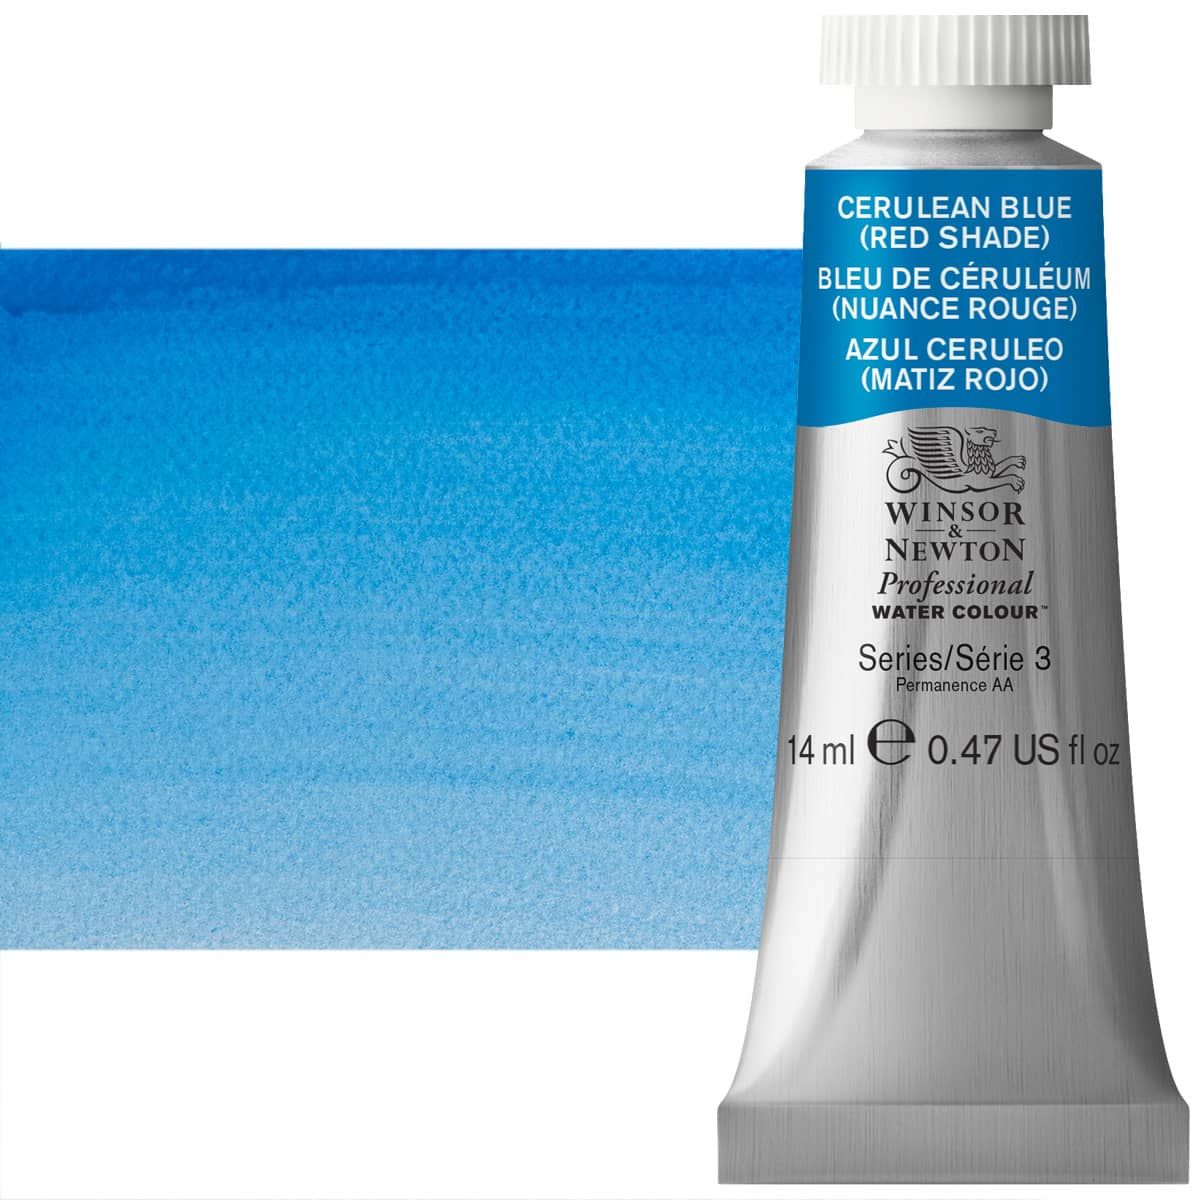 Winsor And Newton Professional Watercolor Cerulean Blue Red Shade 14ml